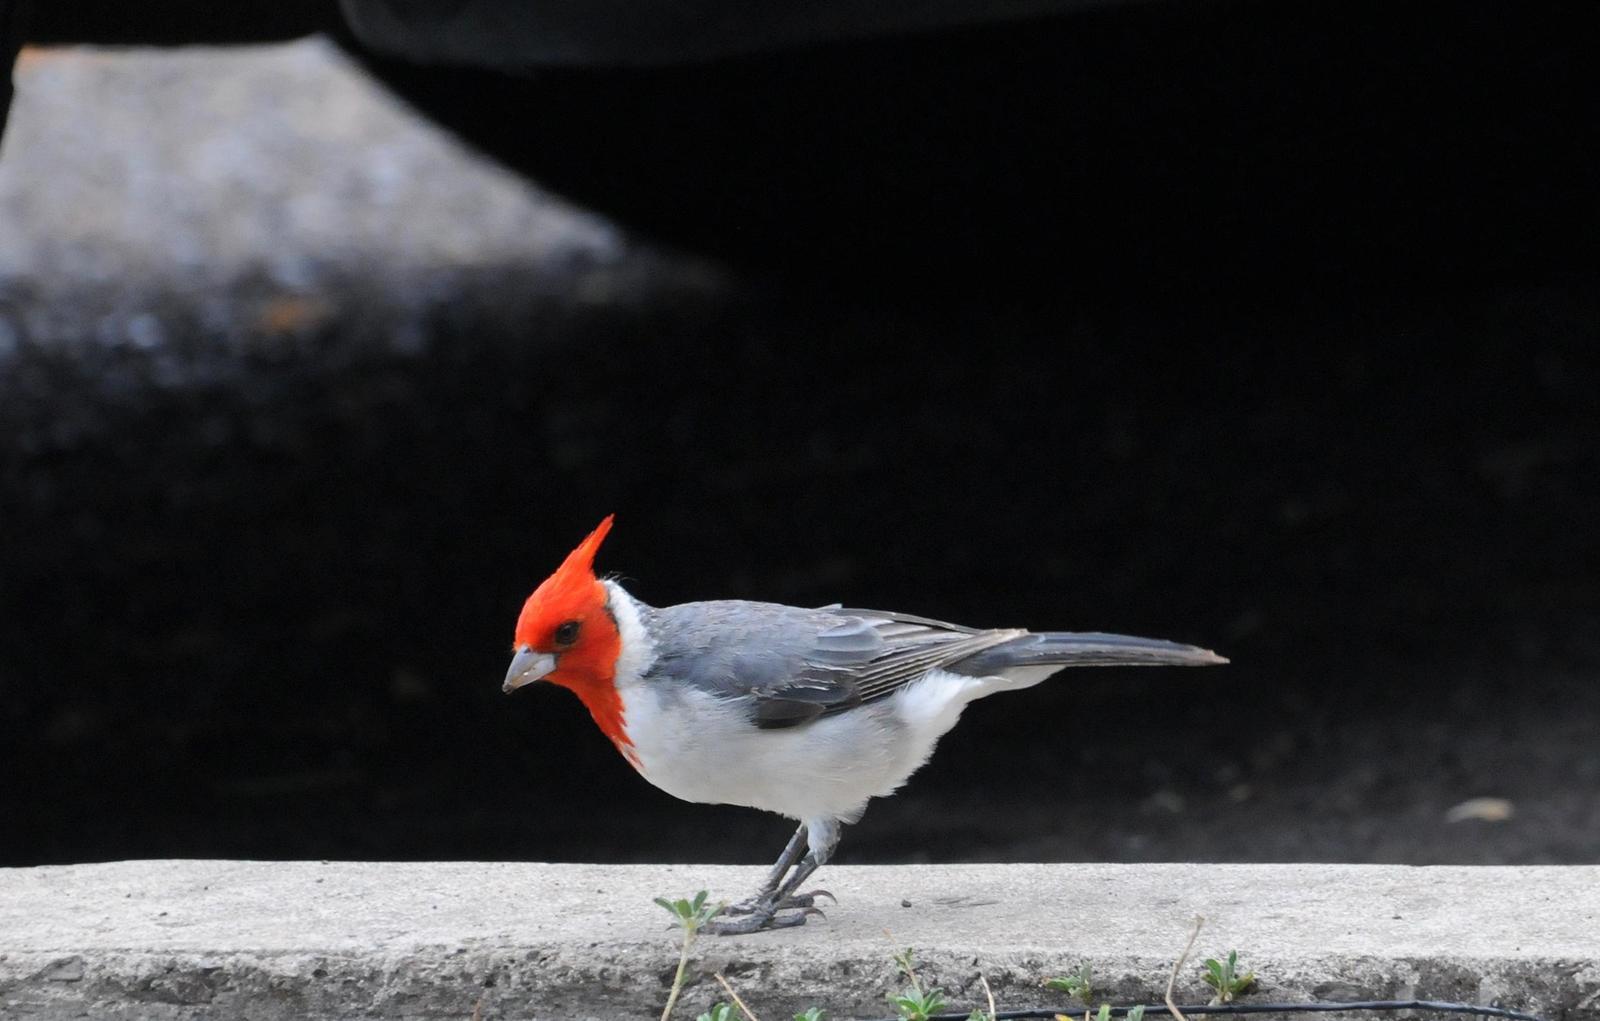 Red-crested Cardinal Photo by Steven Mlodinow